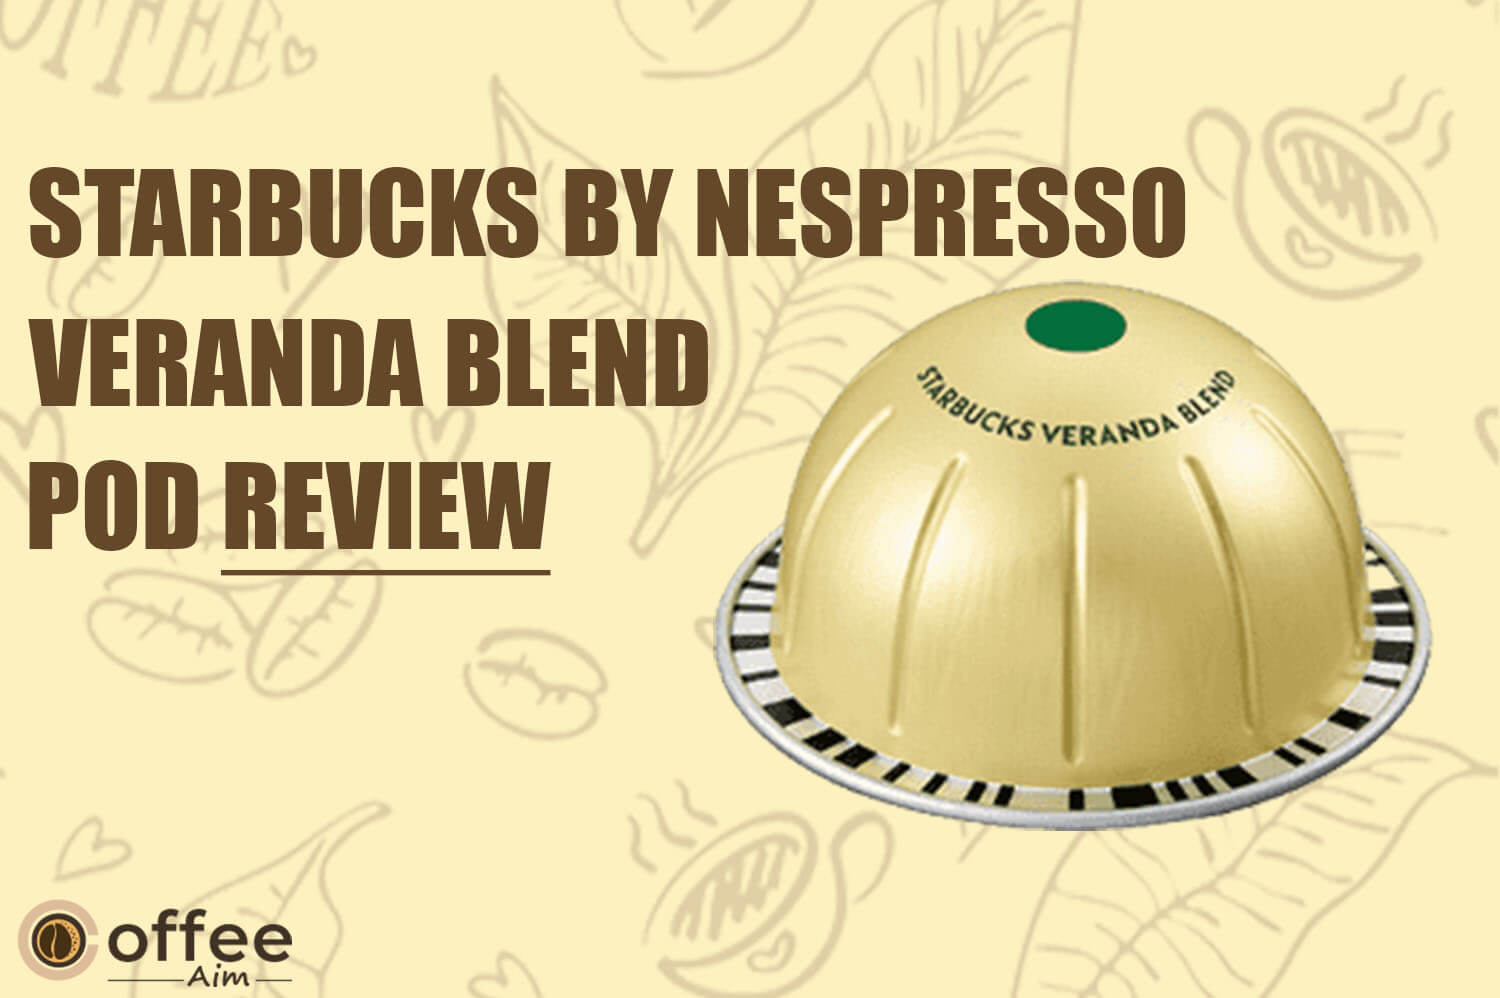 Featured image for the article "Starbucks by Nespresso Vertuo Veranda Blend Pod Review"